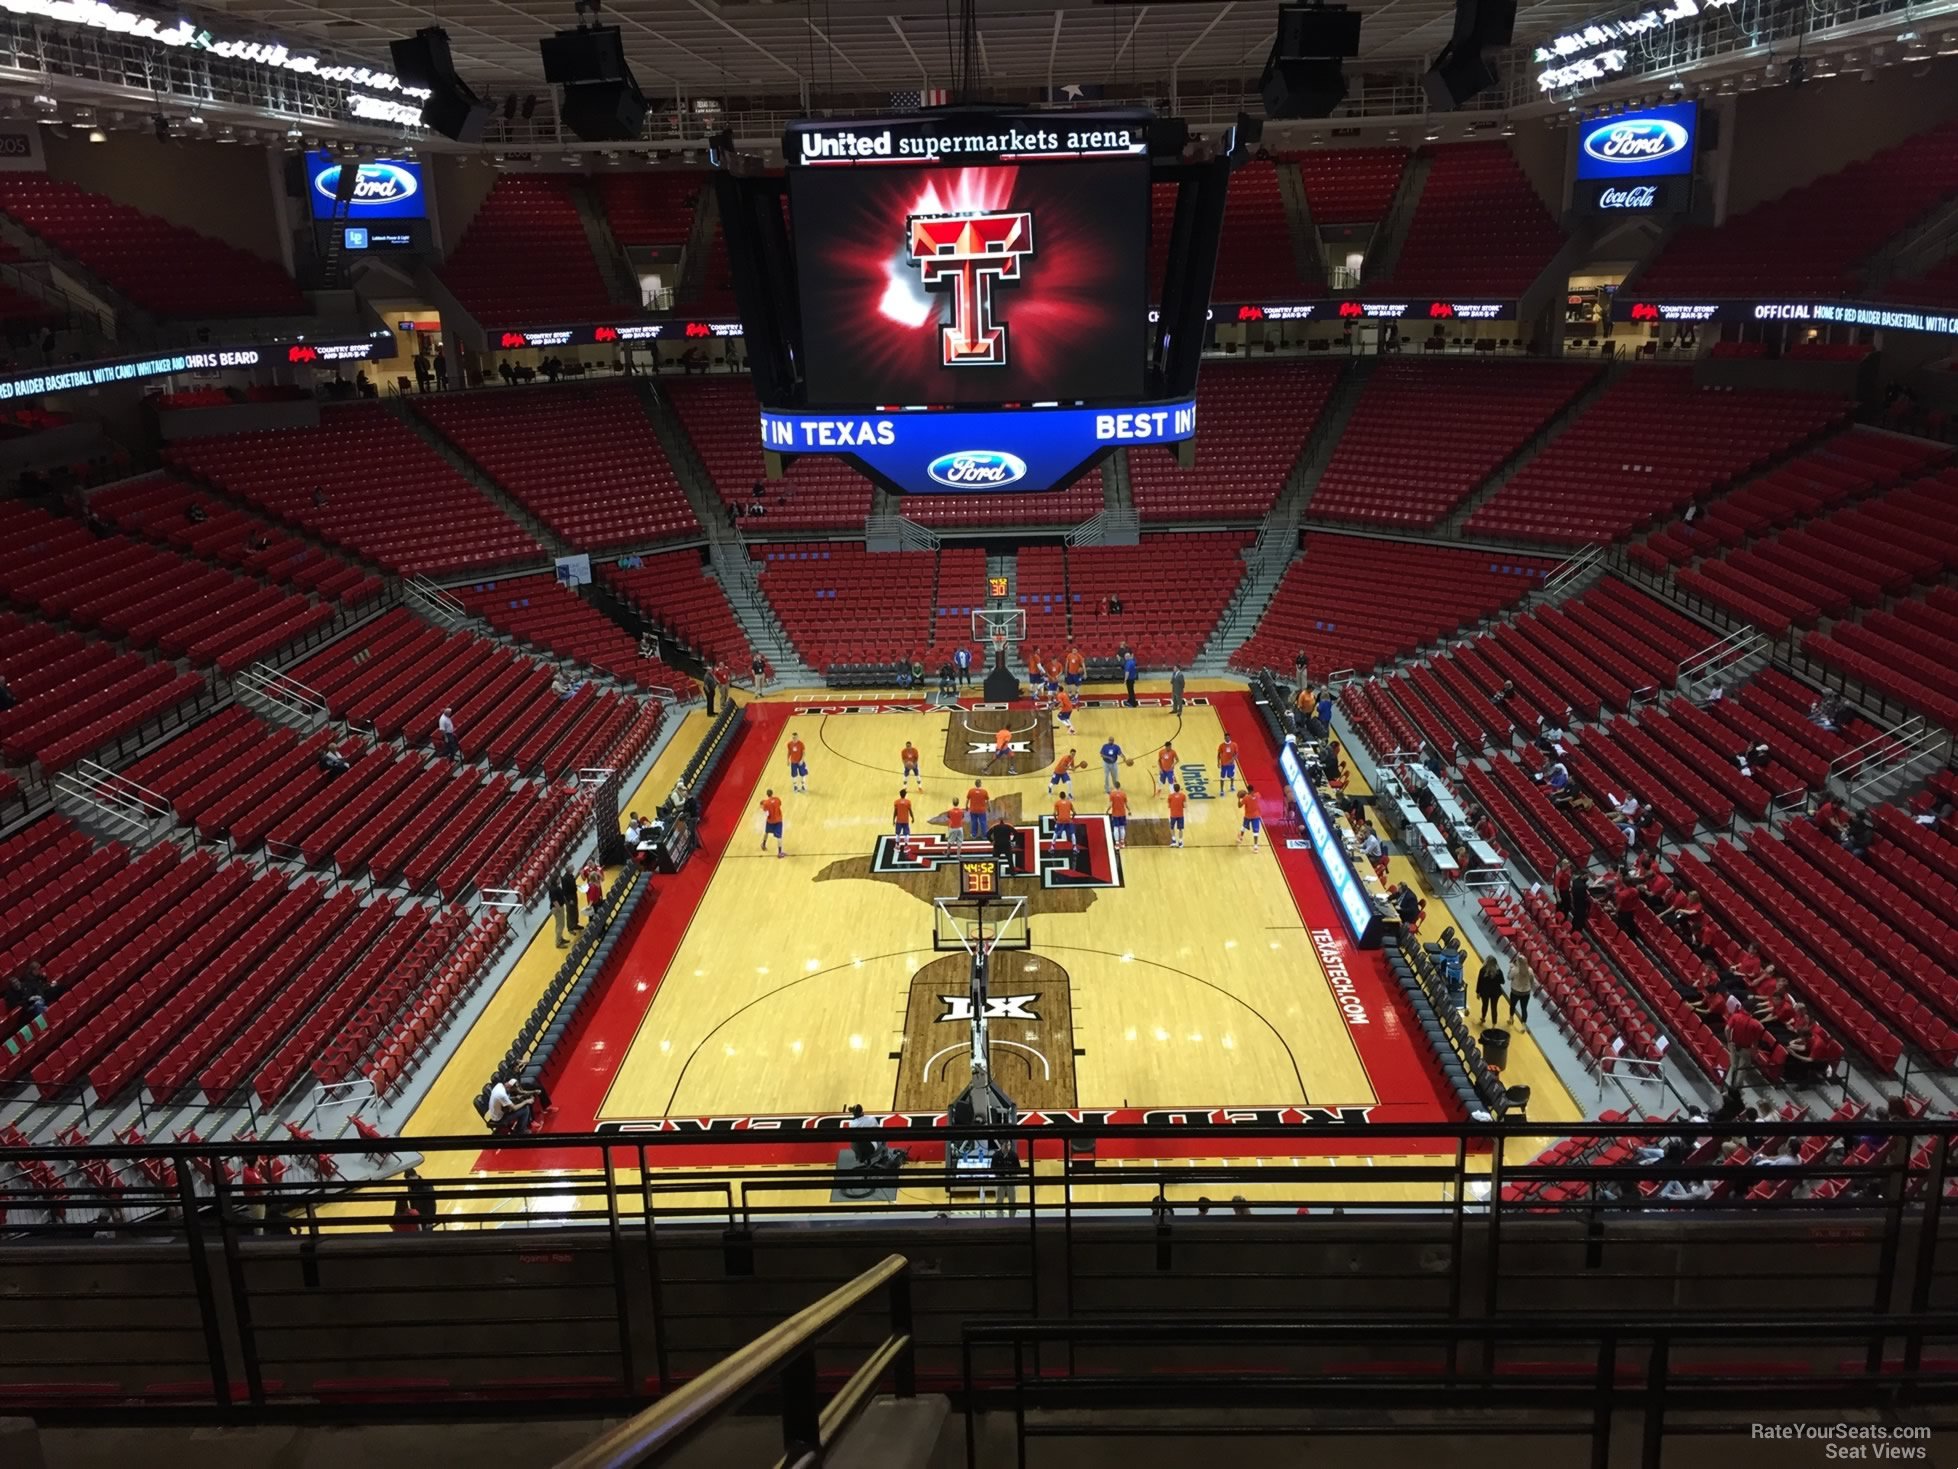 section 225, row 7 seat view  - united supermarkets arena